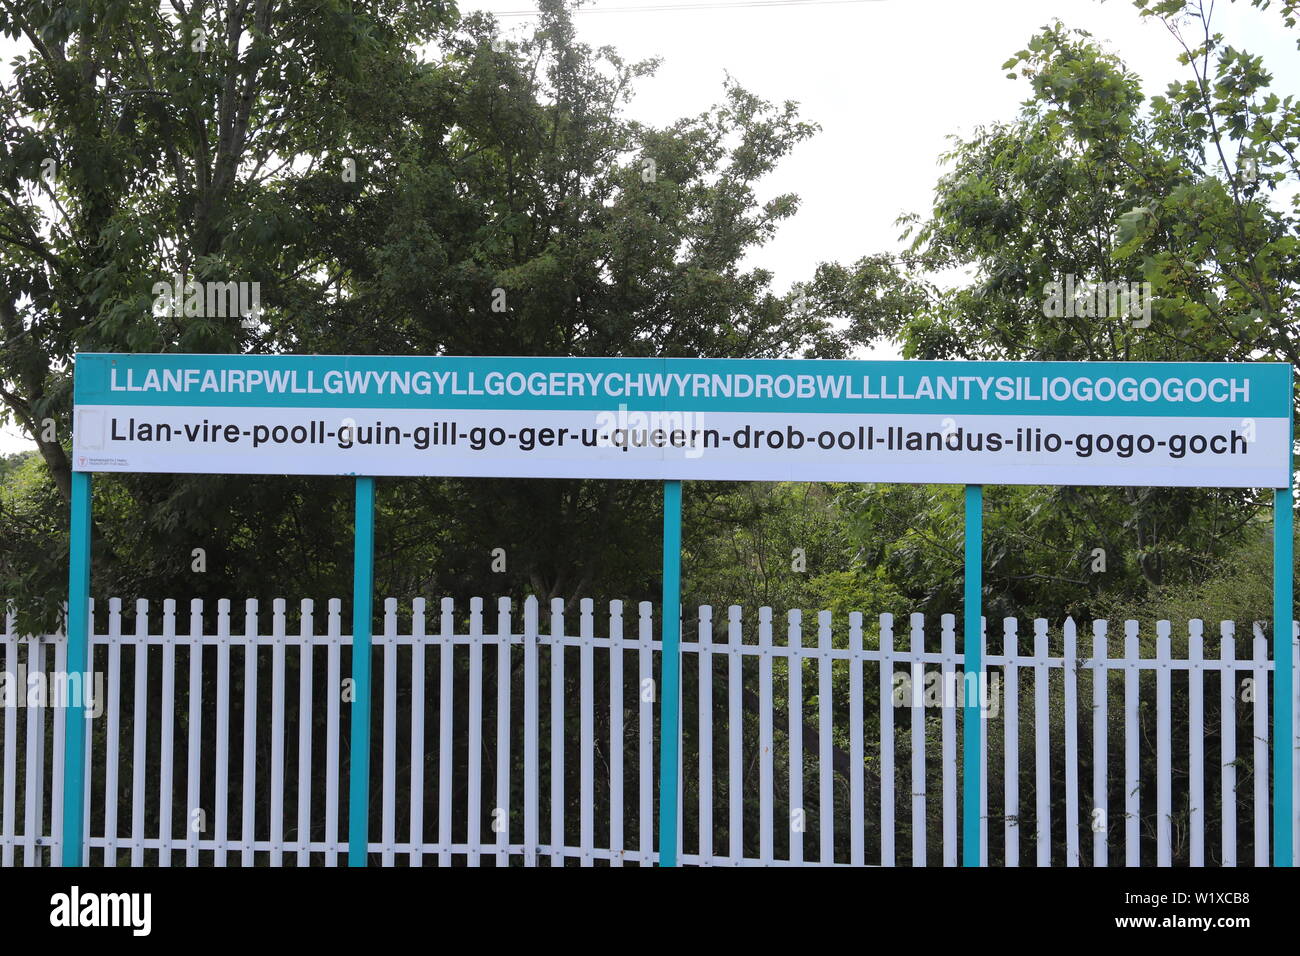 Llanfairpwllgwyngyllgogerychwyrndrobwllllantysiliogogog is a welsh village on Anglesey with the longest name in Britain with 58 characters Stock Photo